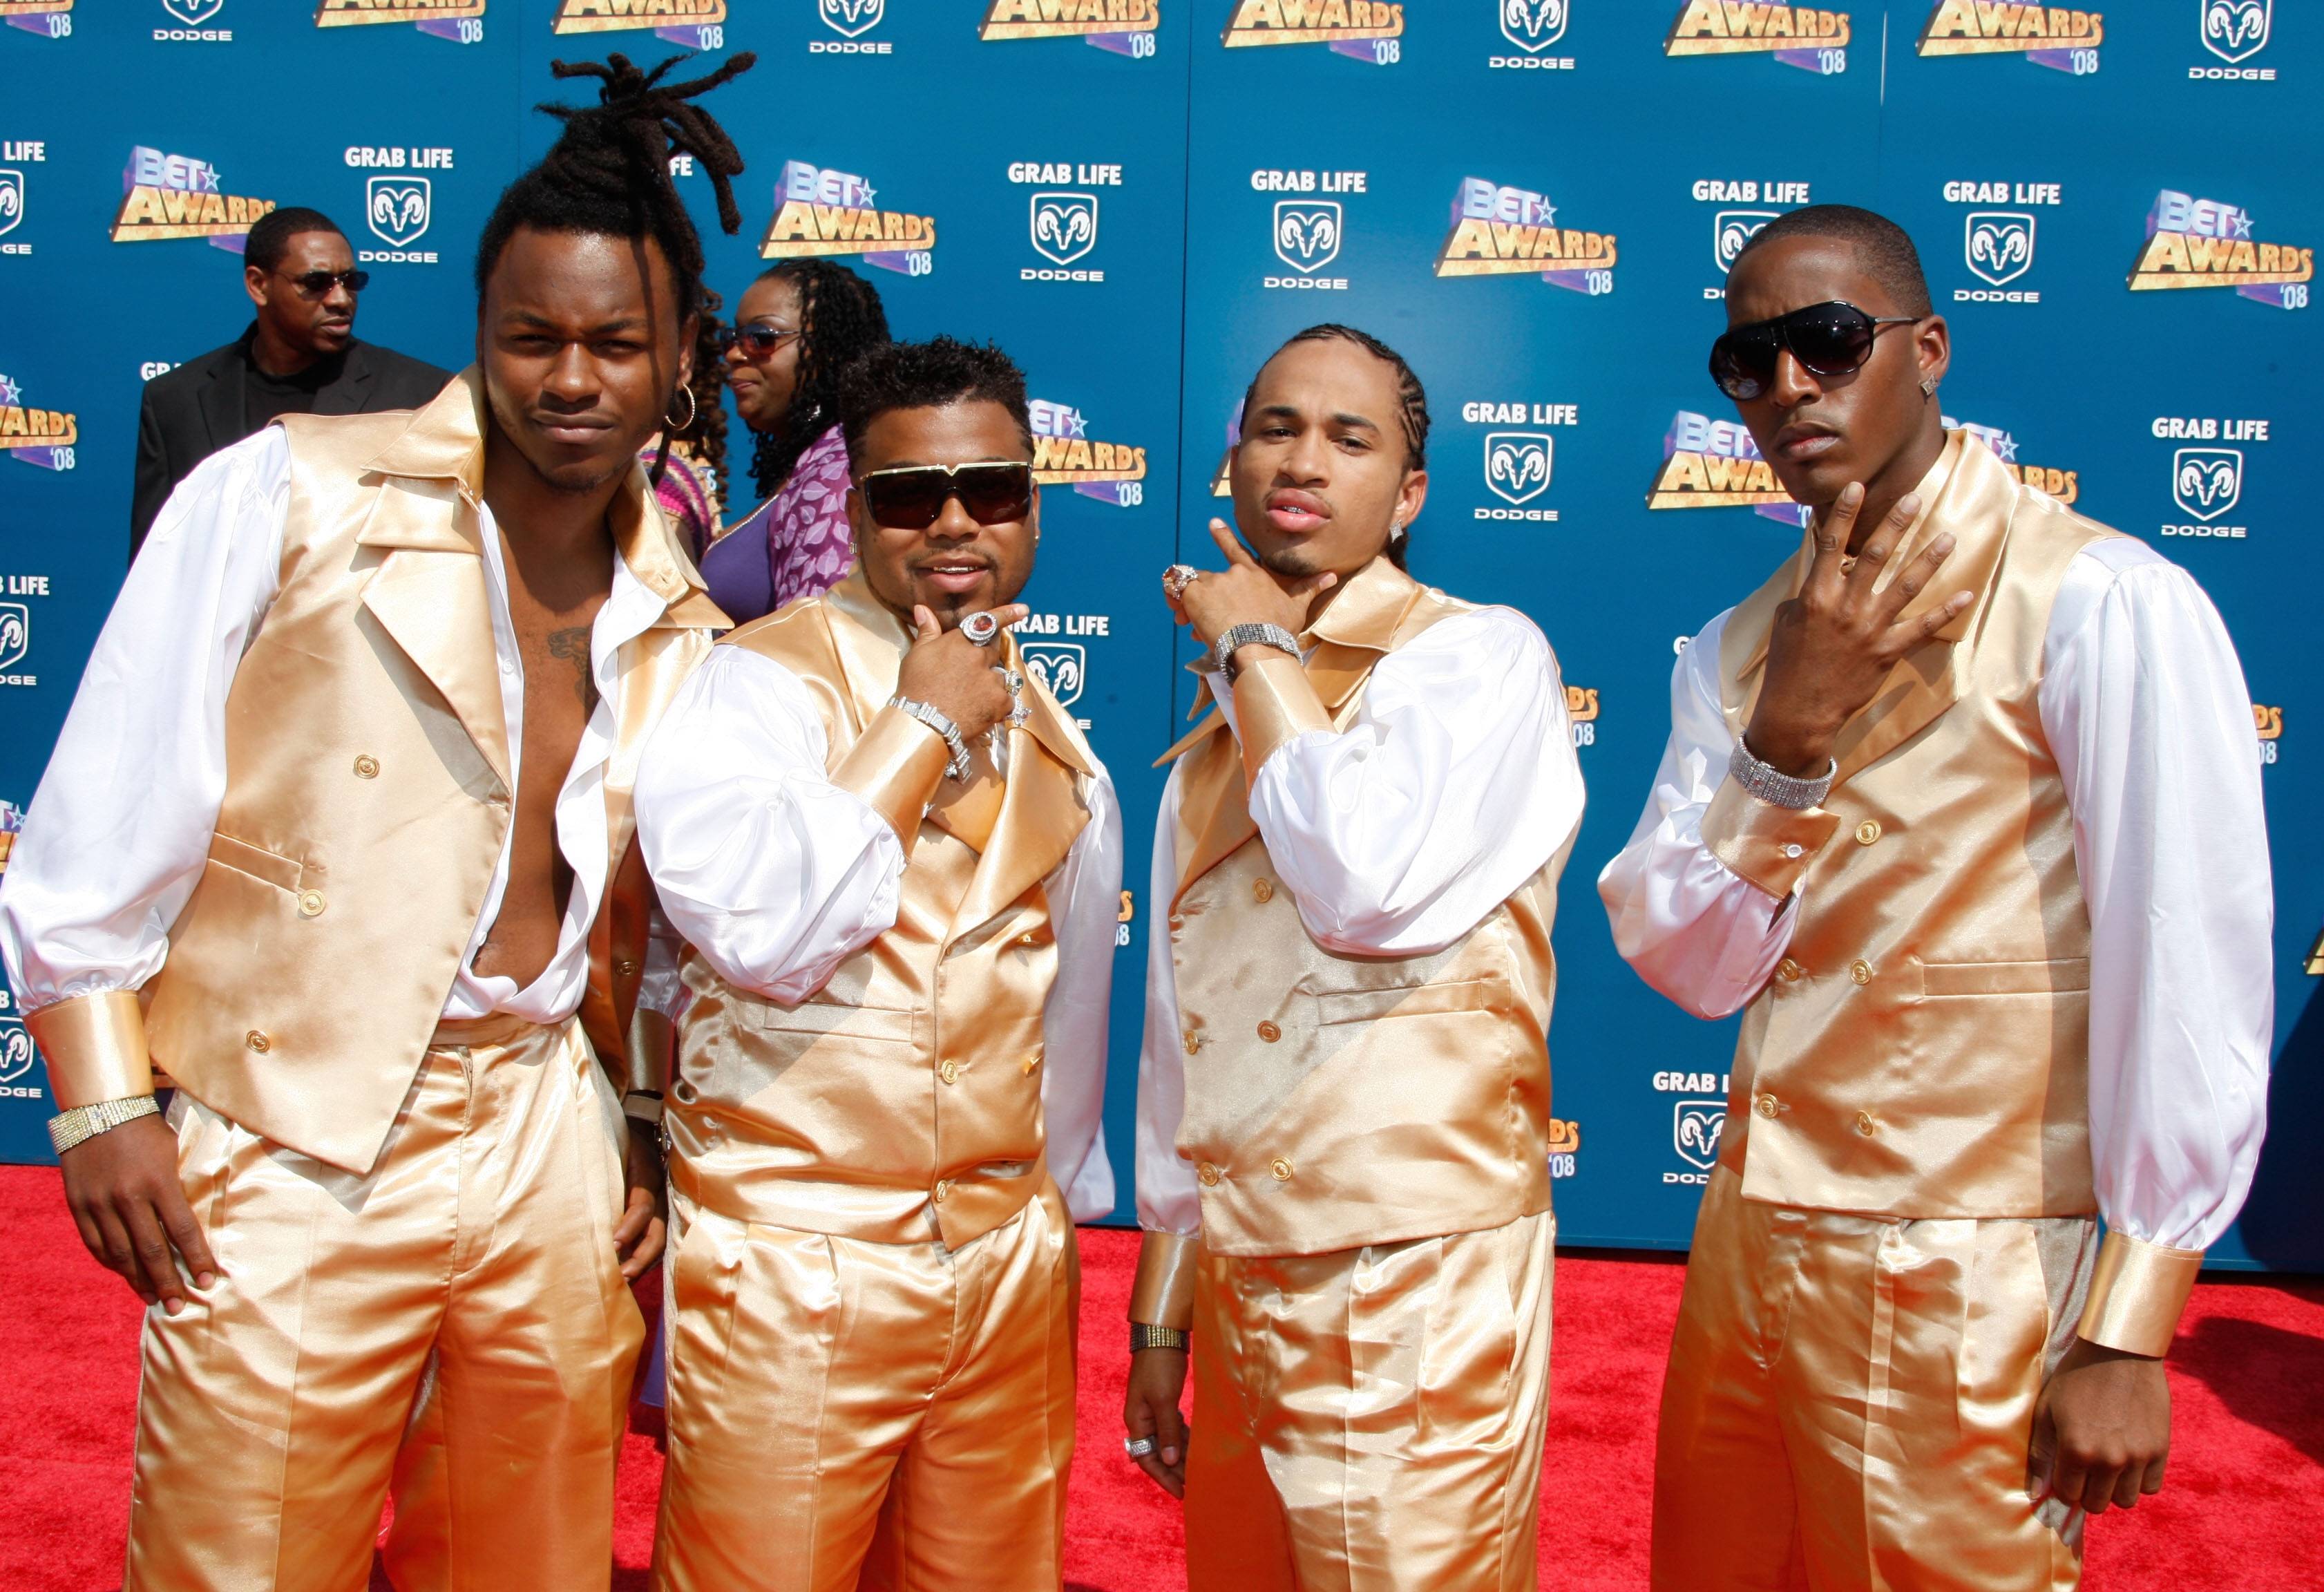 Pretty Ricky Wallpapers